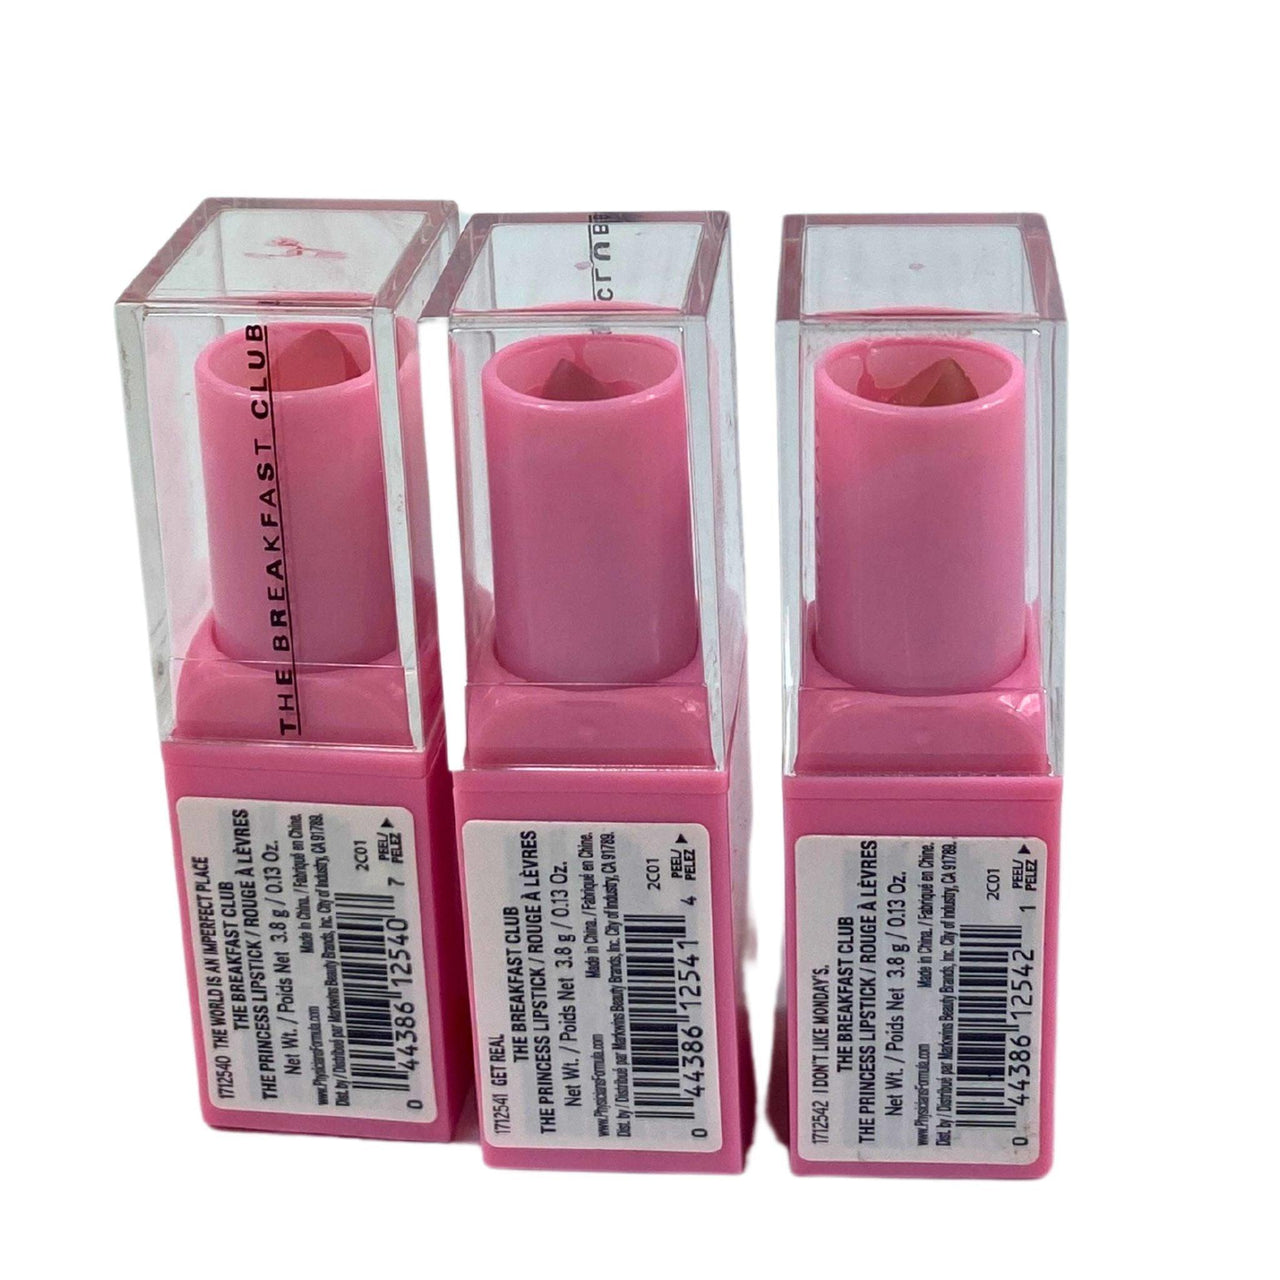 Physicians Formula The Breakfast Club Collection The Princess Lipstick (50 Pcs Lot) - Discount Wholesalers Inc